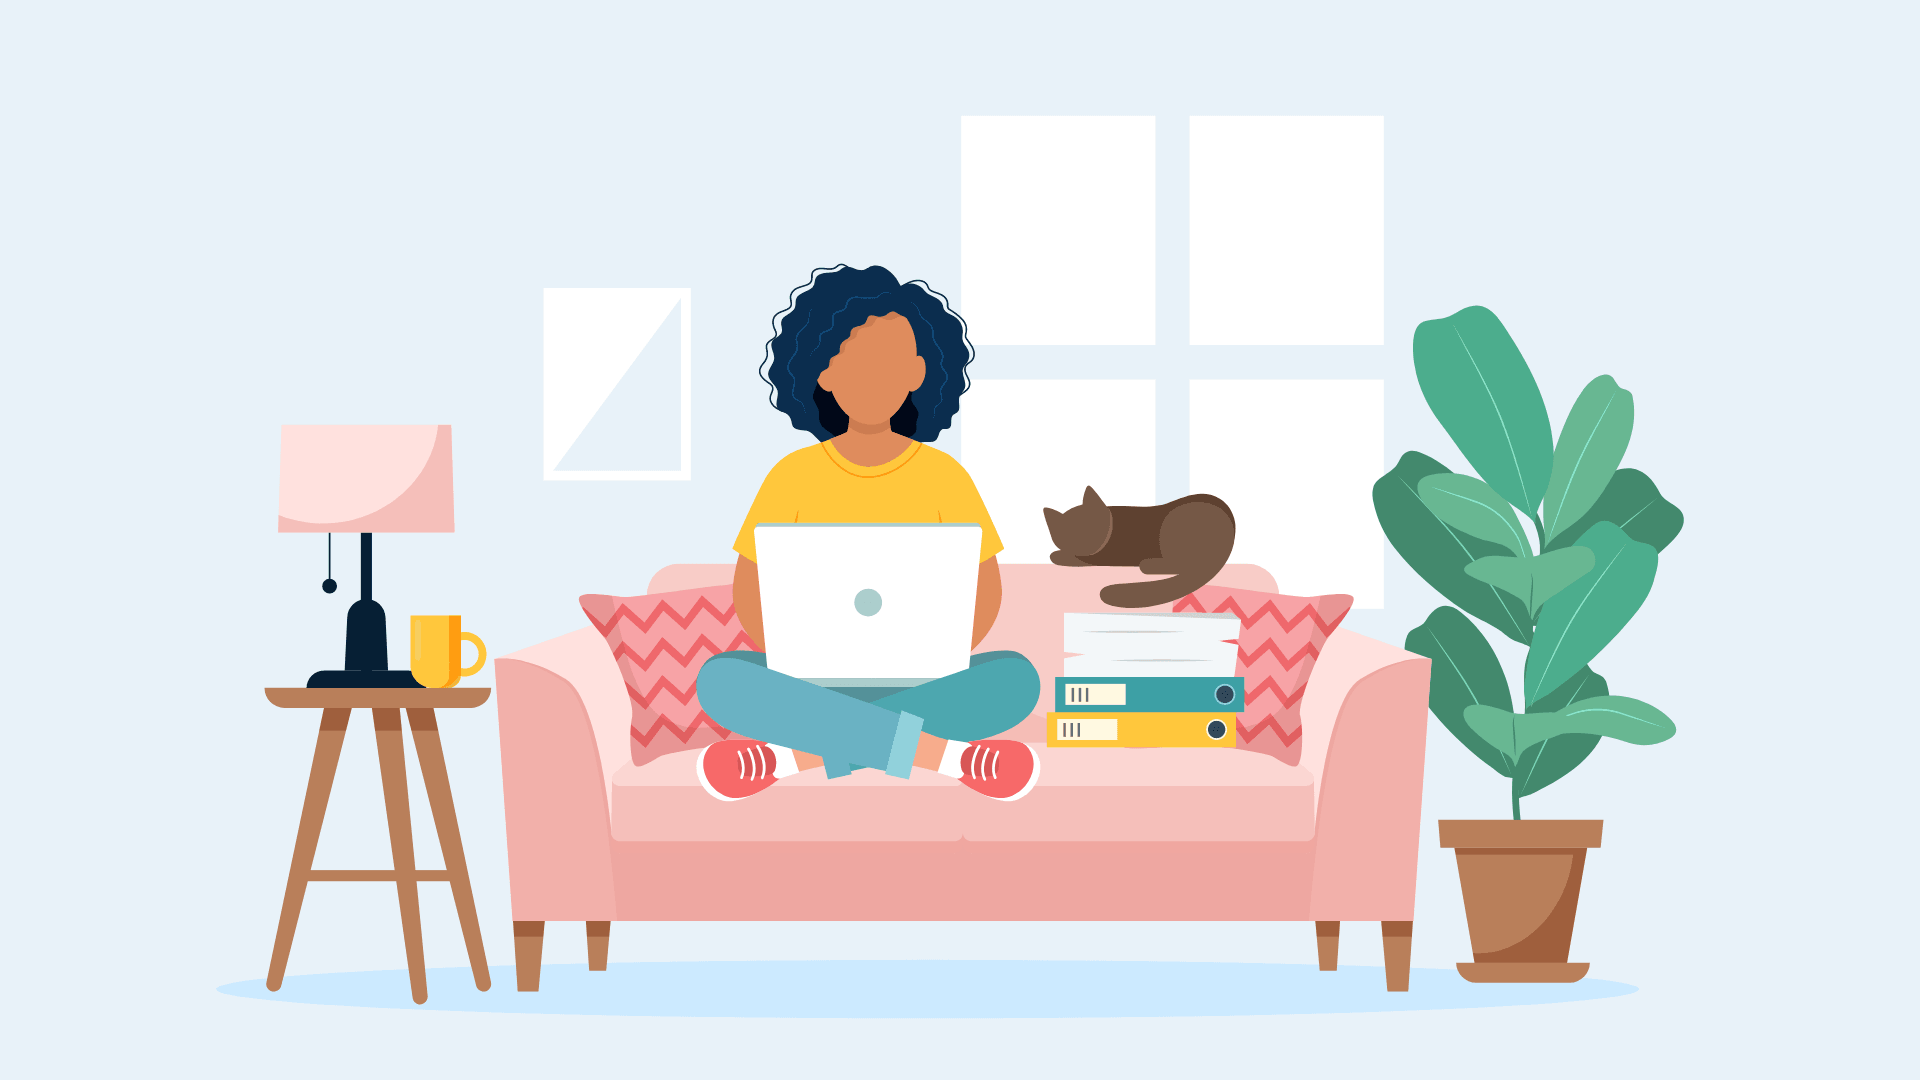 automated-onboarding-illustration